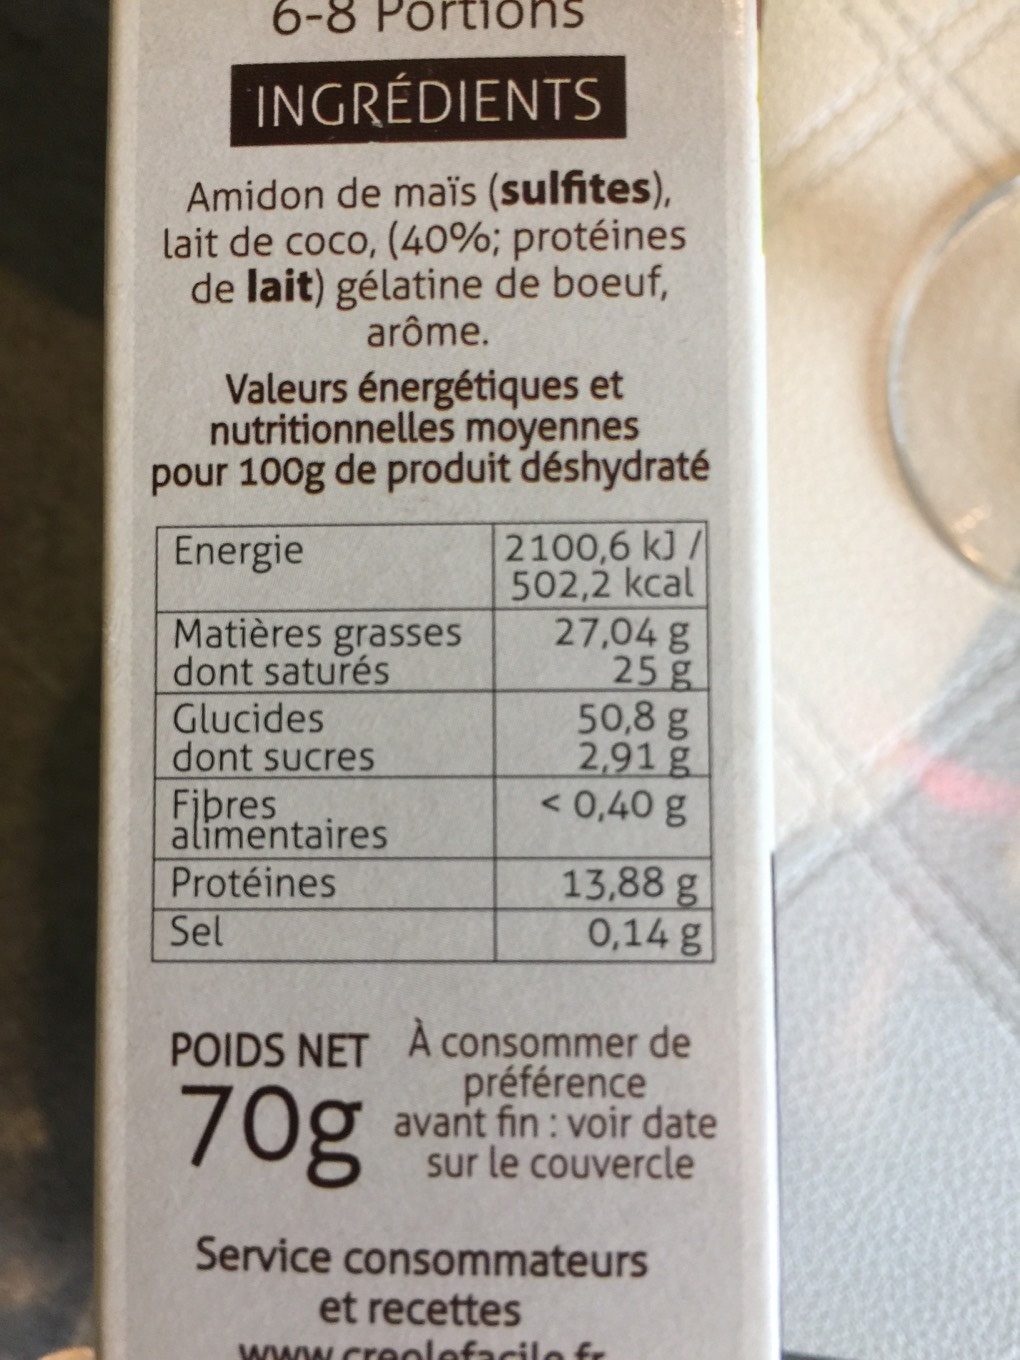 Blanc manger coco - Nutrition facts - fr